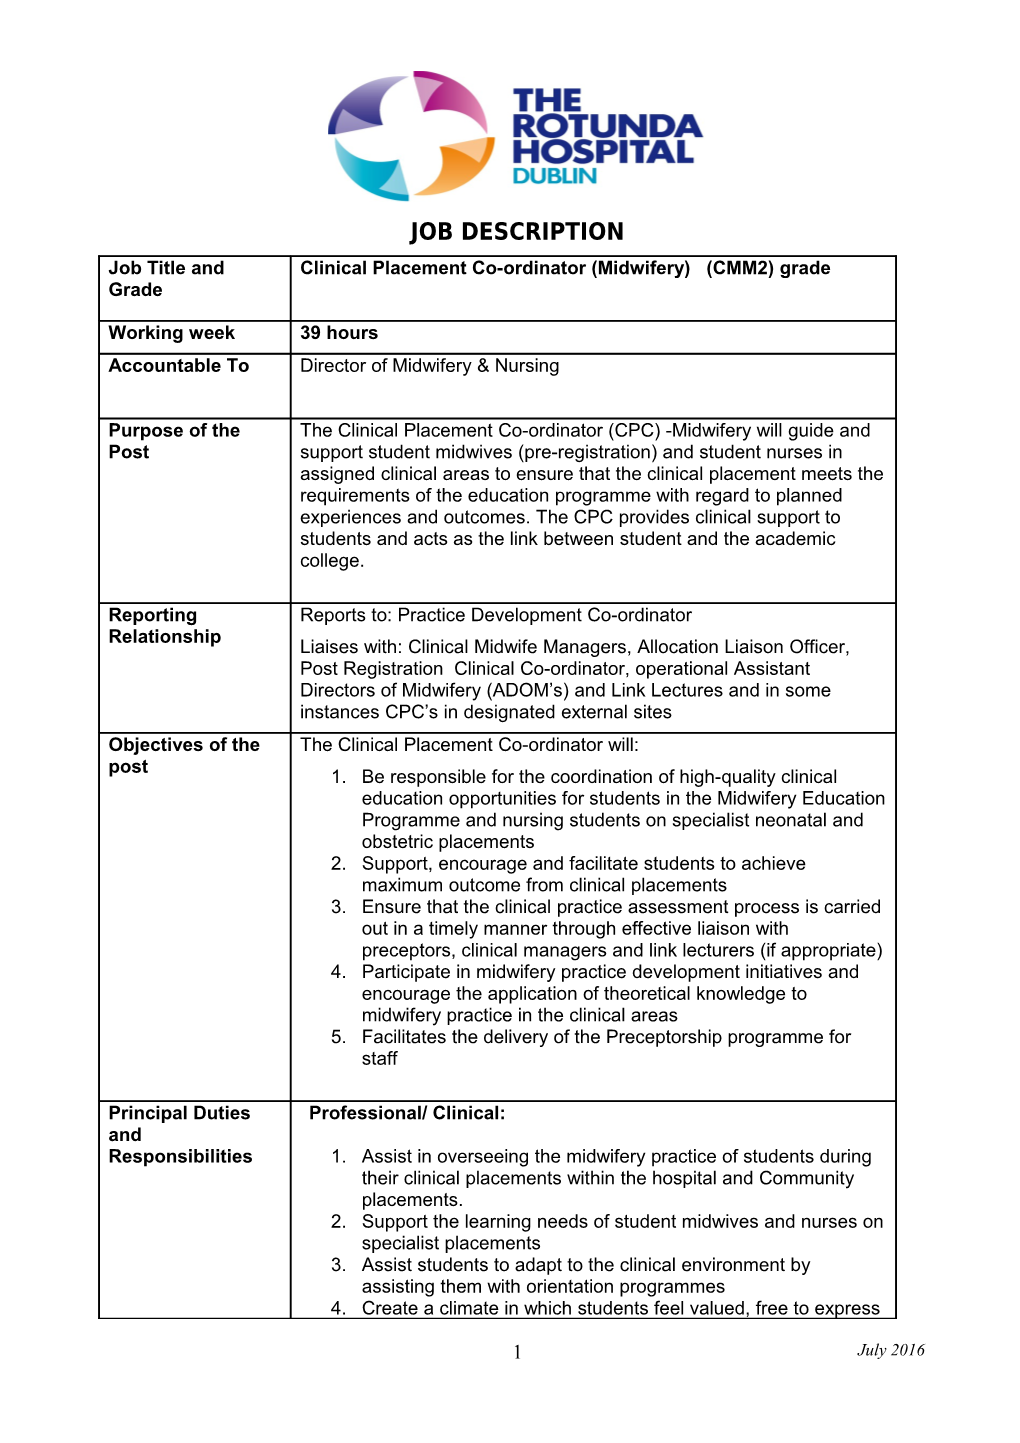 Job Description Extract from Agreed PPG Feb 2005